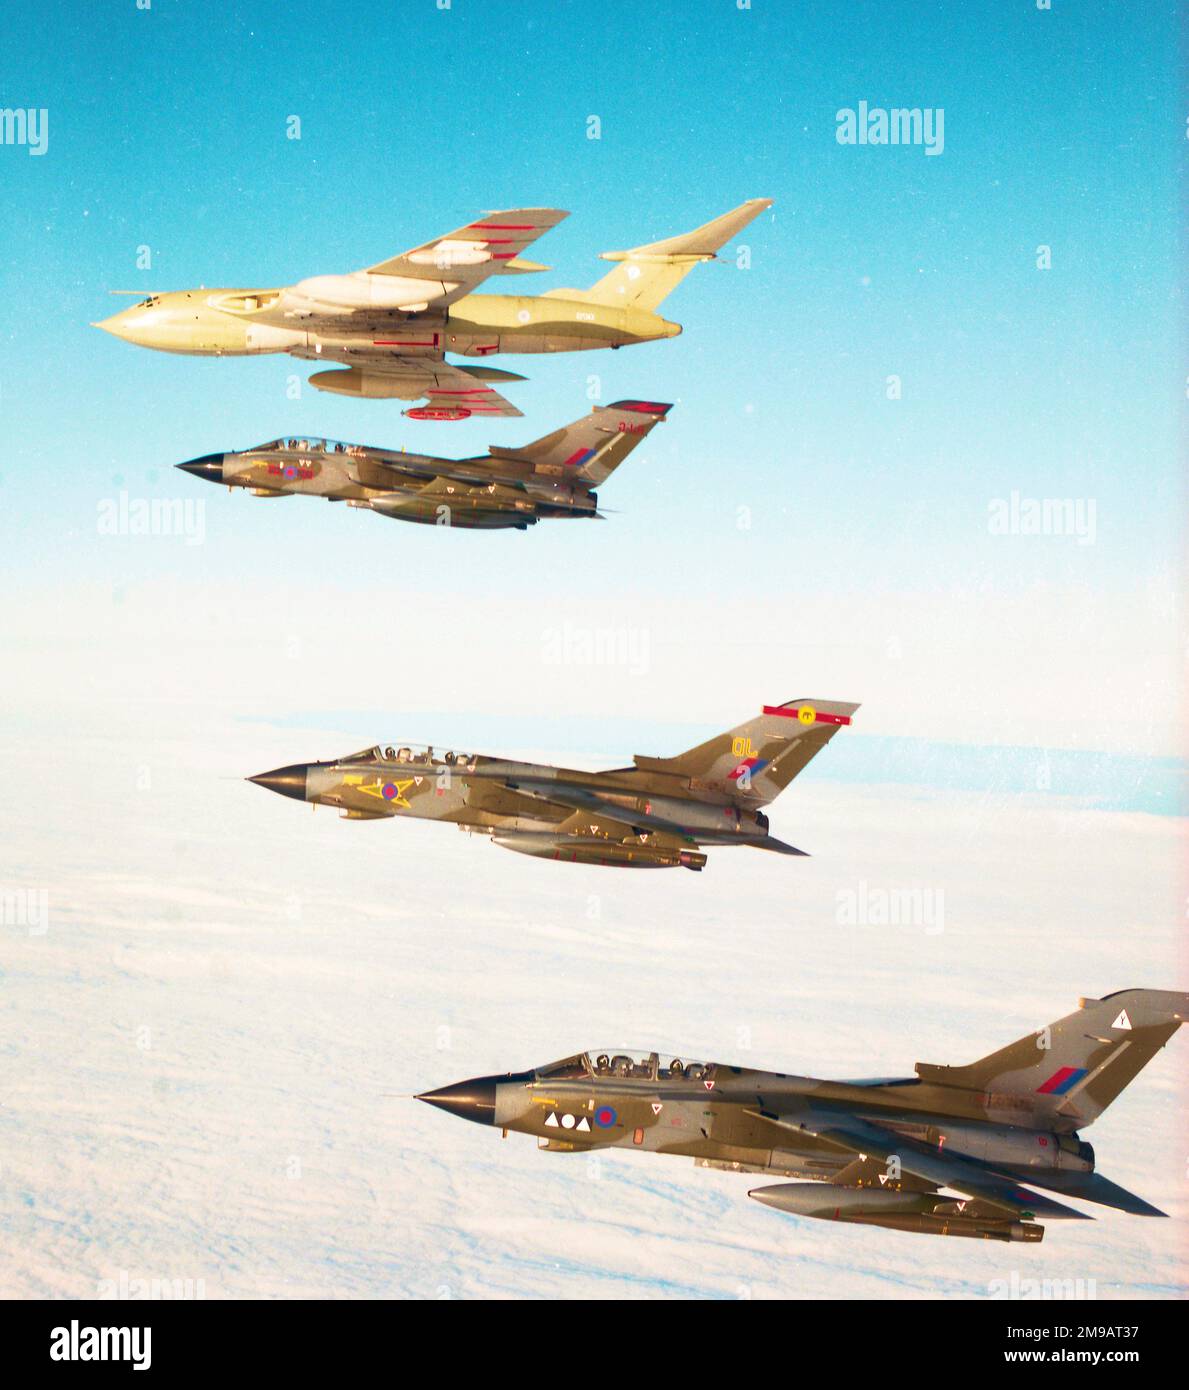 Royal Air Force - Handley Page Victor K.2 XM715 of No.55 Squadron, in formation with Panavia Tornado GR.1s, of No.617 Squadron, No.27 Squadron and No,2(AC) Squadron Stock Photo